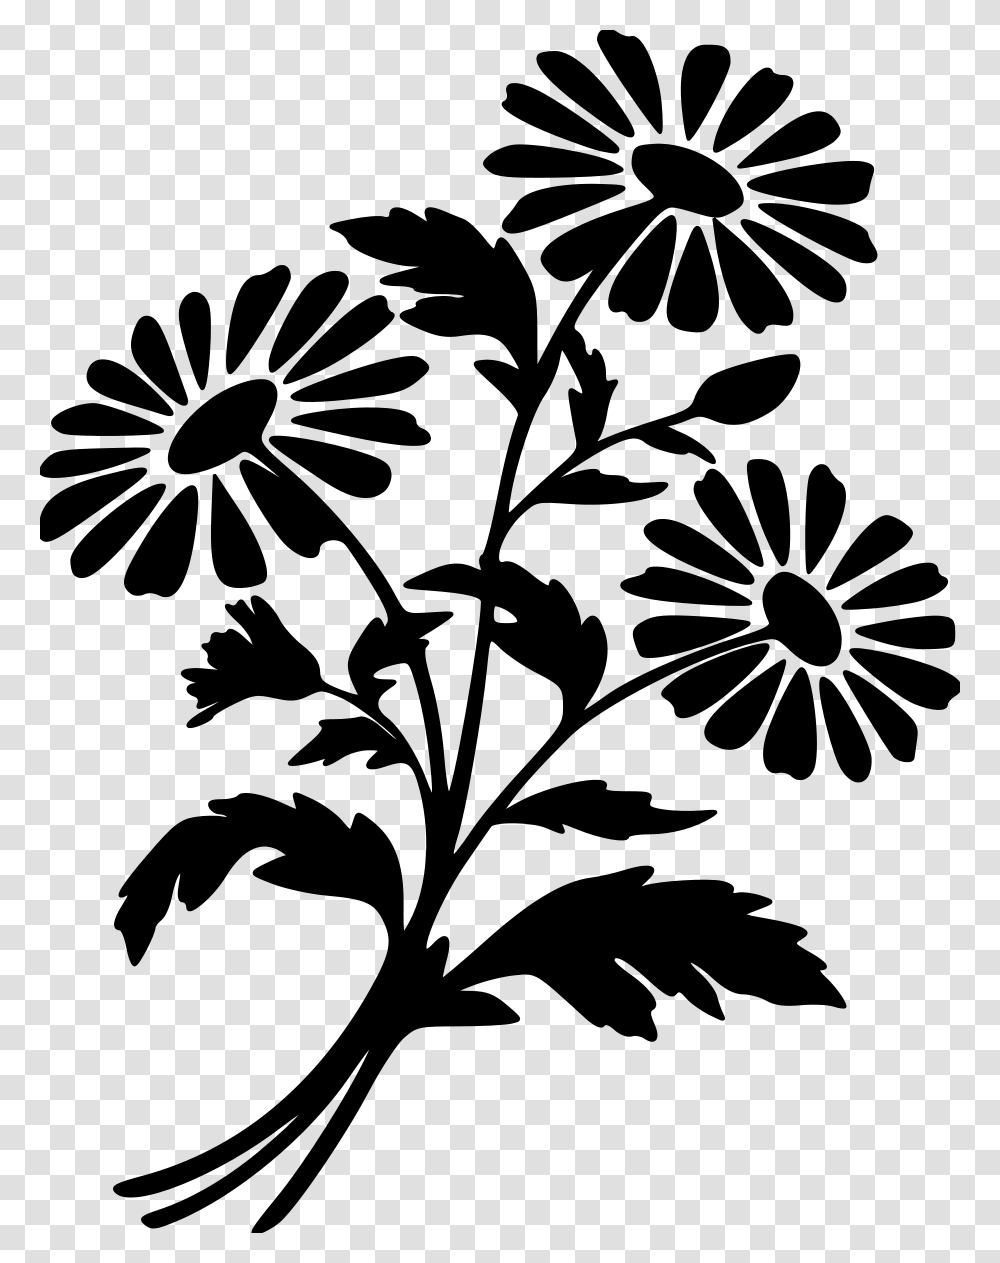 Vector Graphics Silhouette Illustration Flower Image Chamomile Flower Silhouette, Gray Transparent Png